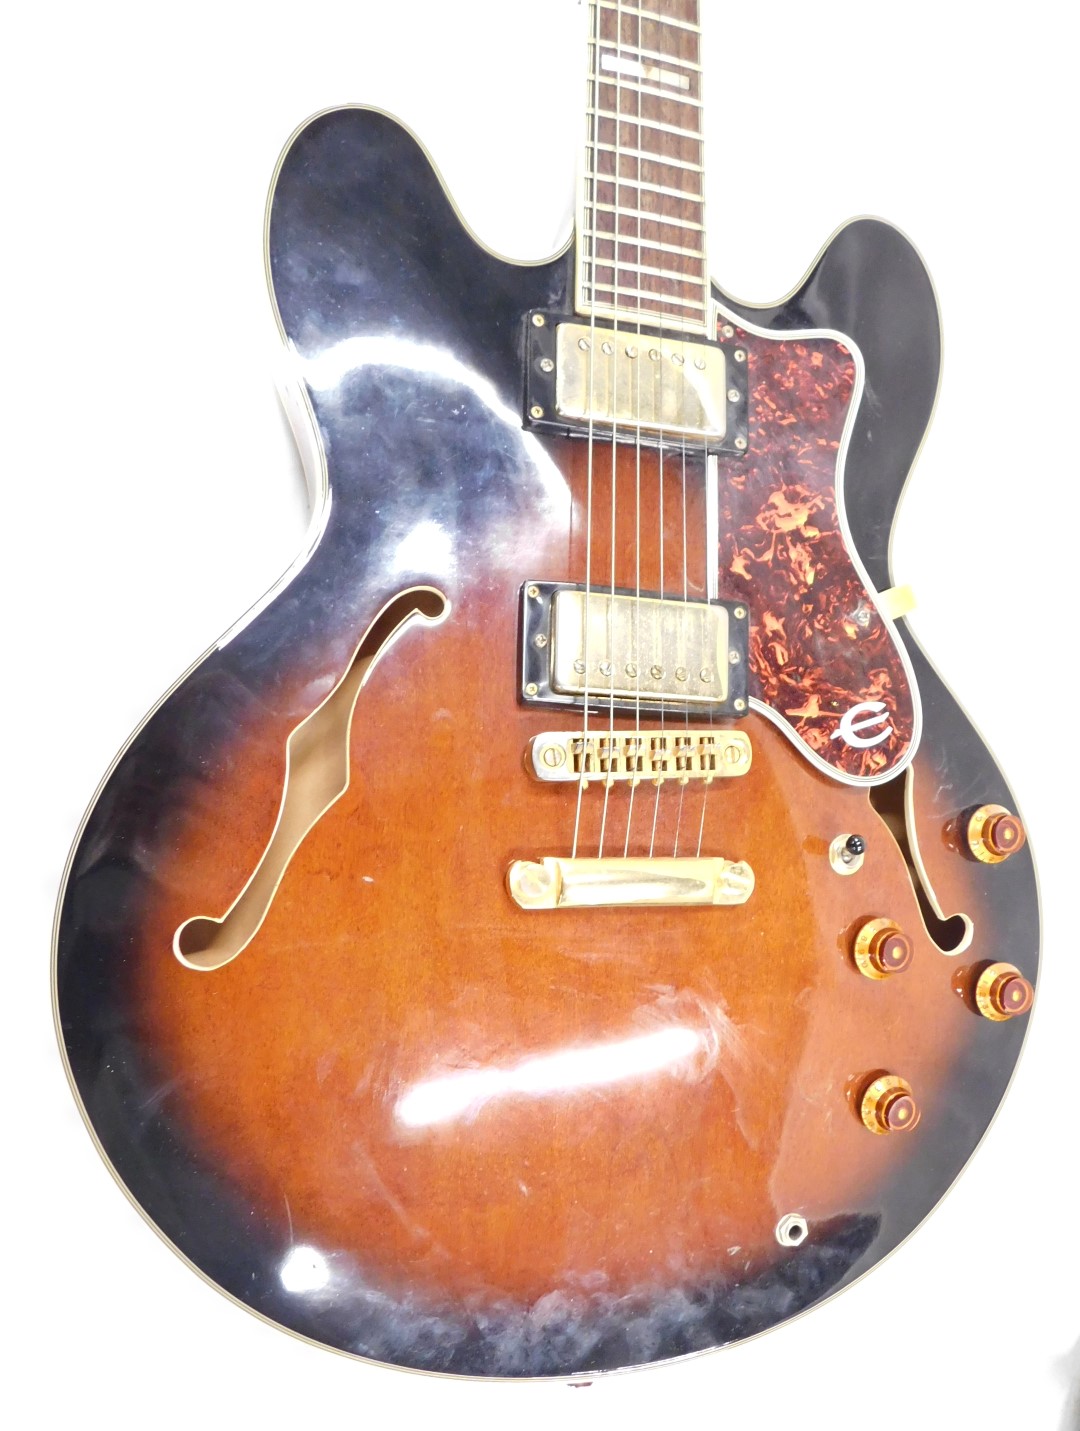 An Epiphone ES-335 electric guitar, with mother of pearl fret inlays, with padded travel case. - Image 2 of 8